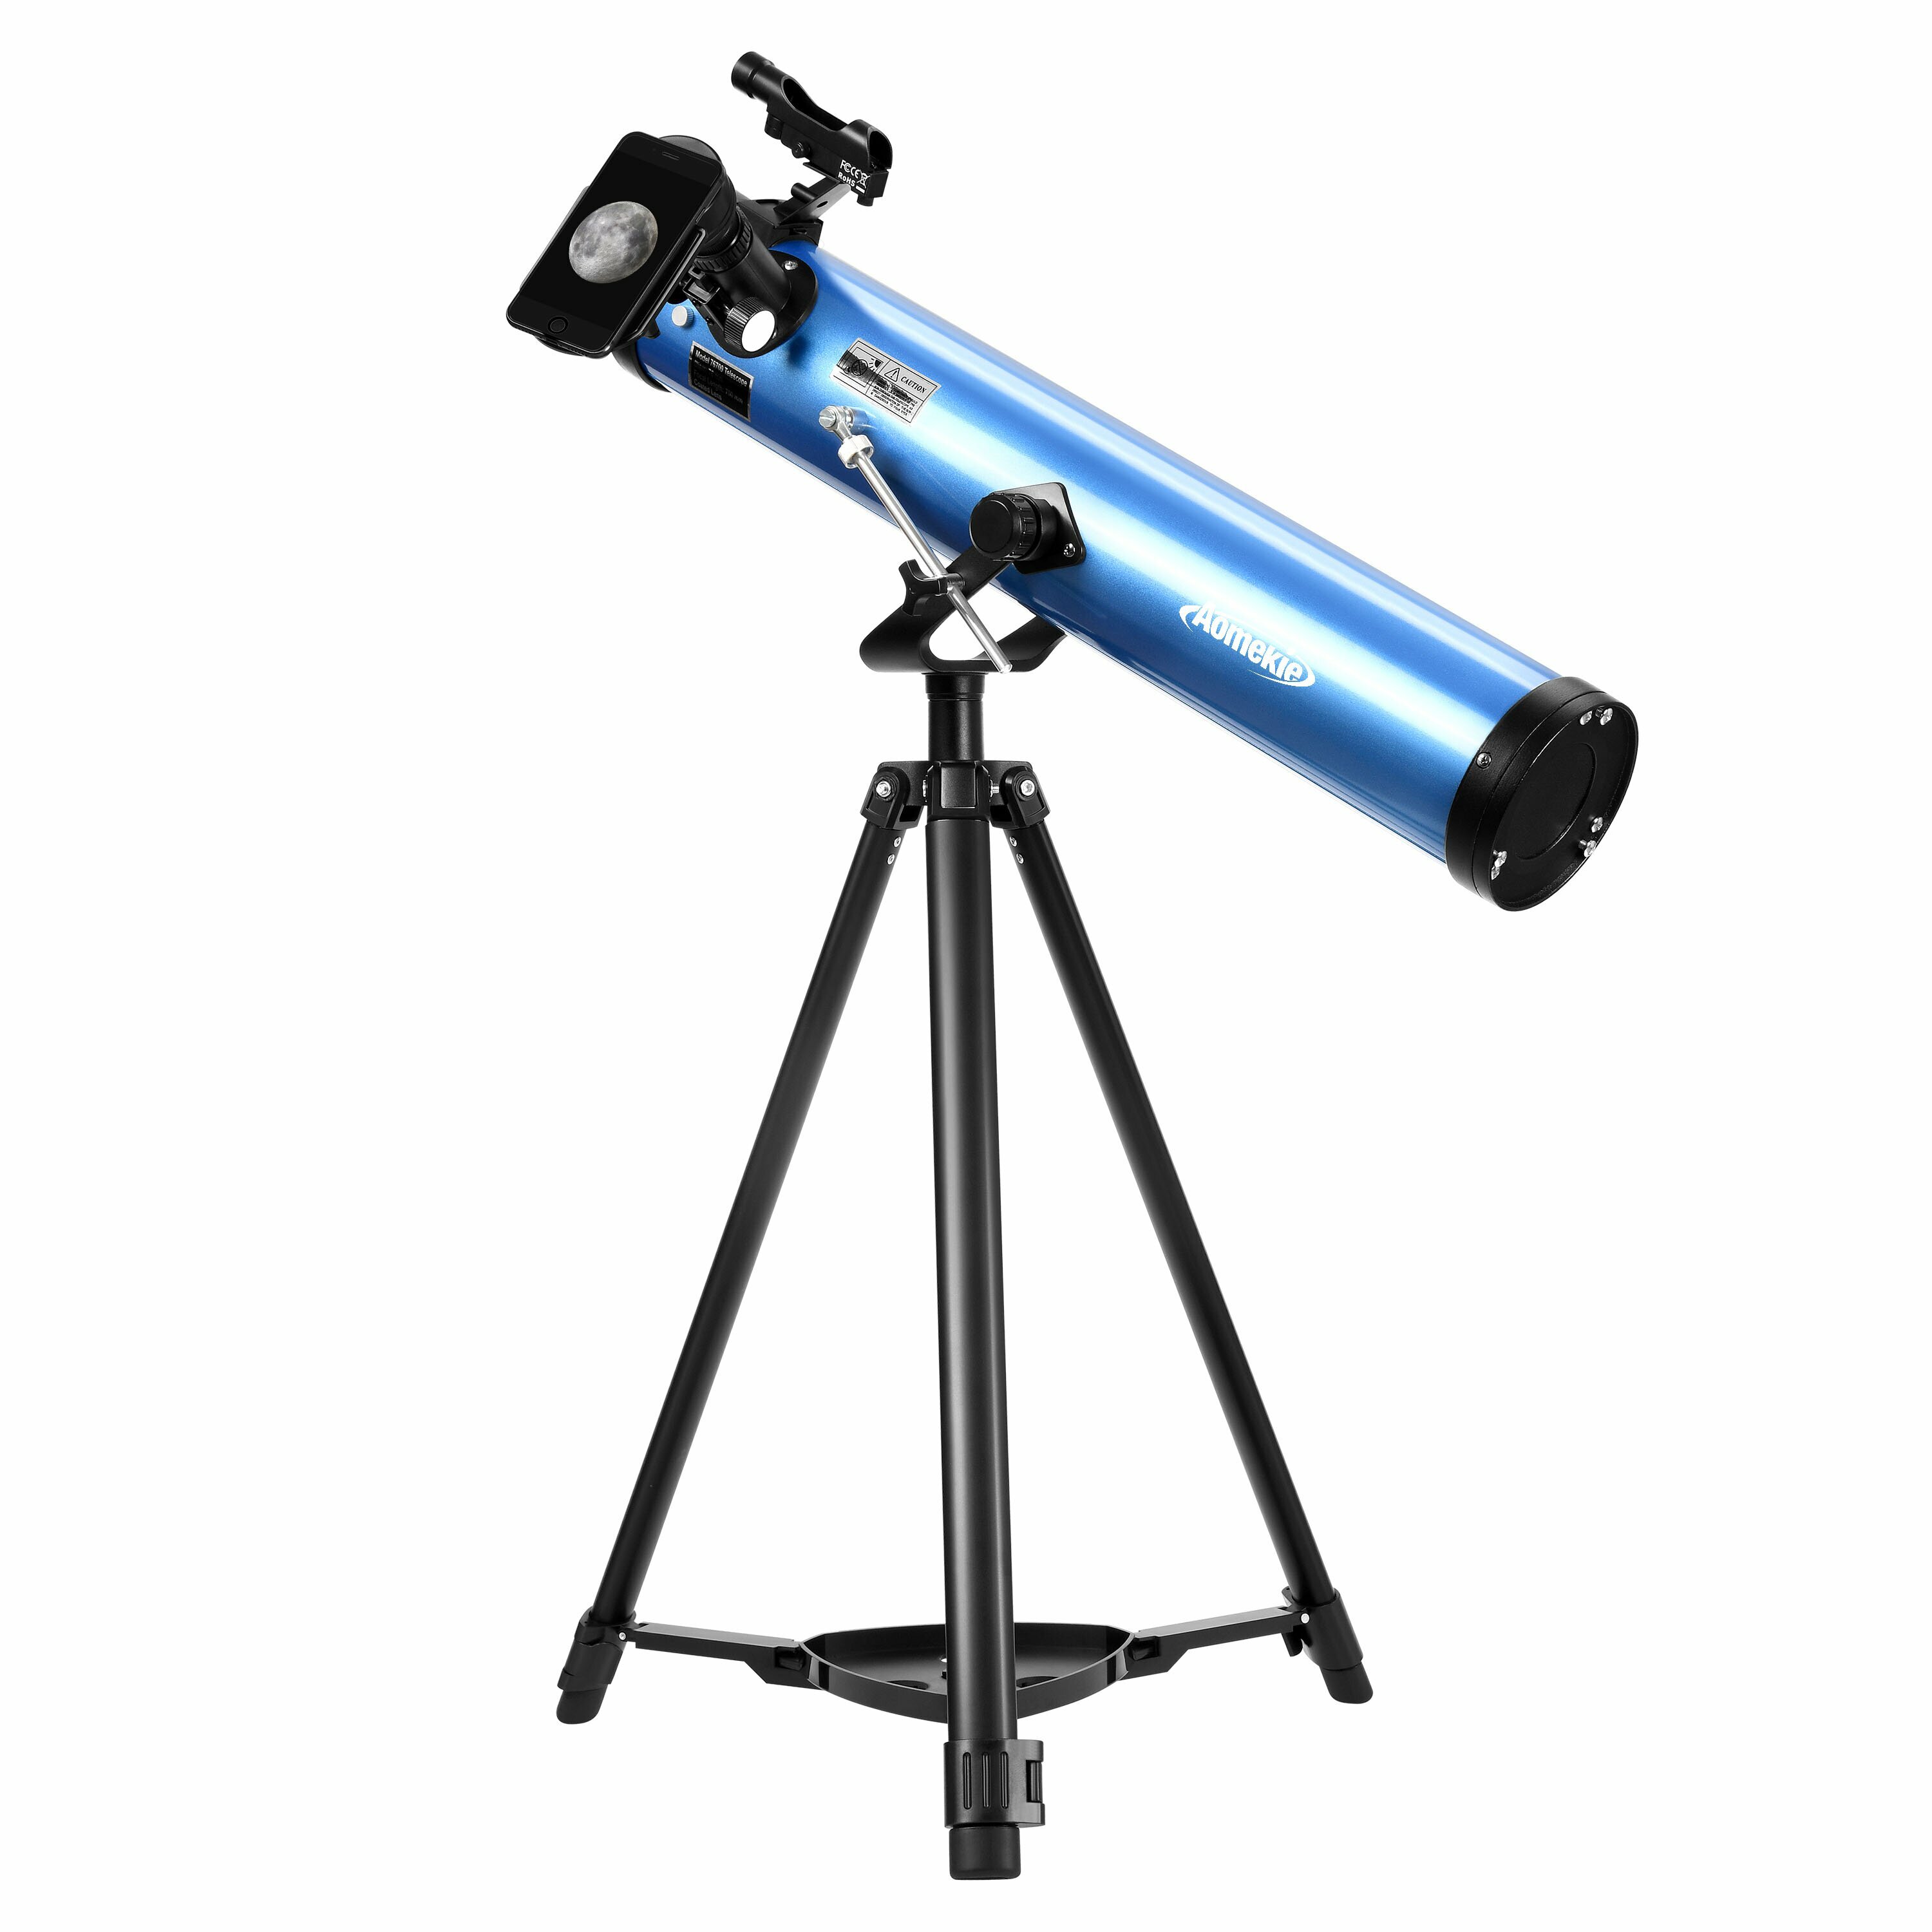 [EU Direct] AOMEKIE Reflector Telescopes for Adults Astronomy Beginners 76mm/700mm with Phone Adapter Bluetooth Controller Tripod Finderscope and Moon Filter A02018